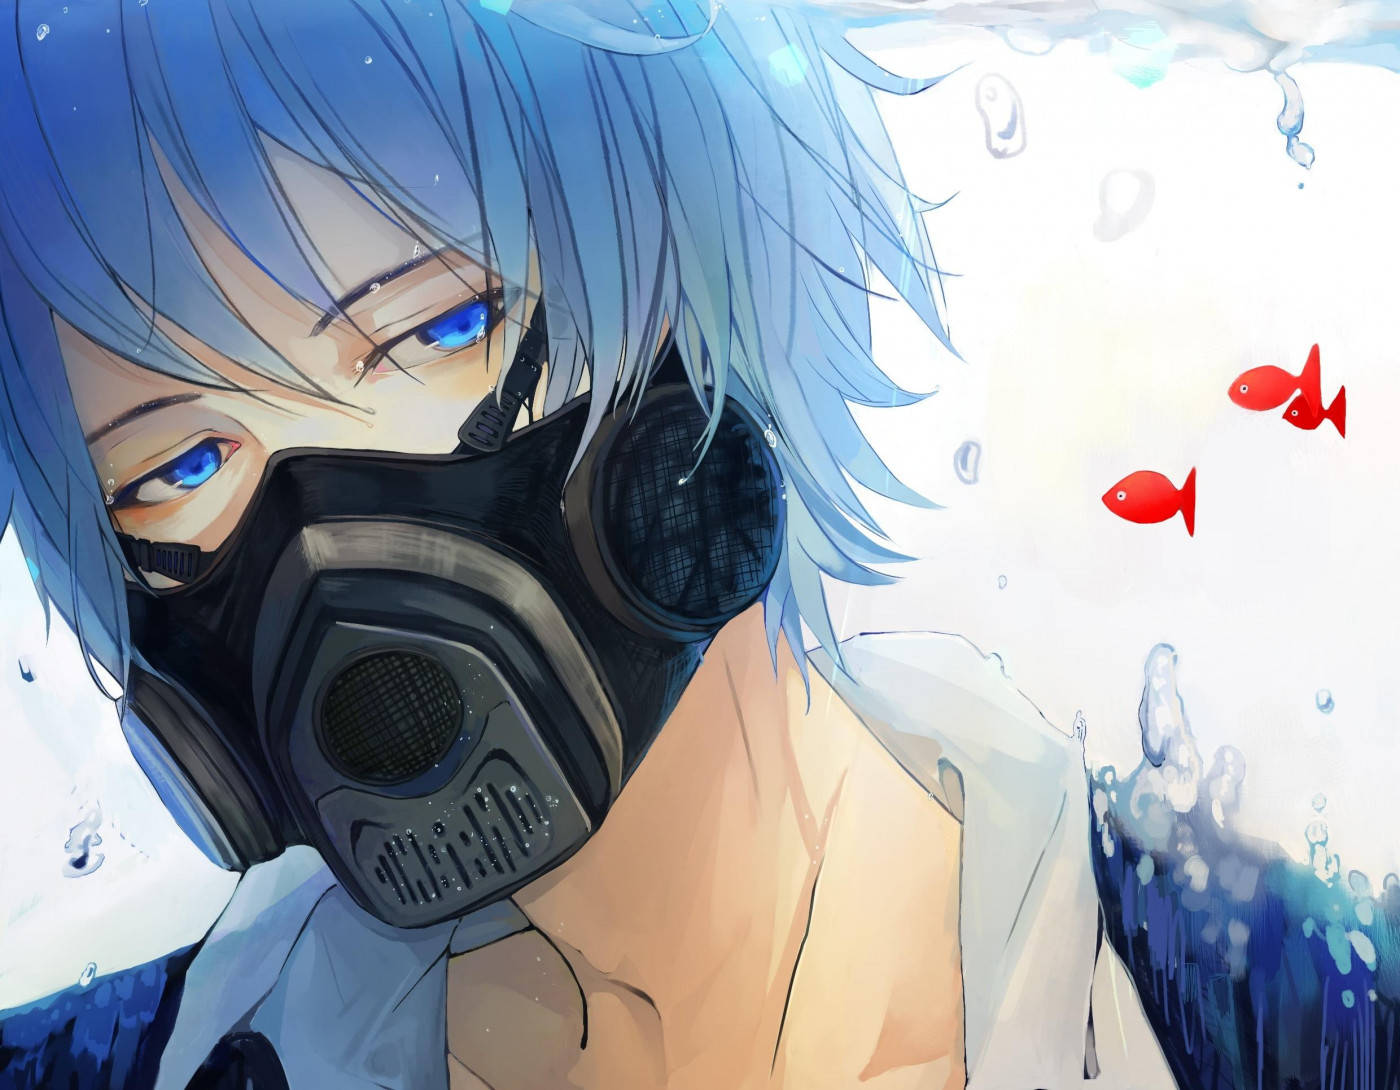 Explore the World with This Anime Blue Boy Wallpaper